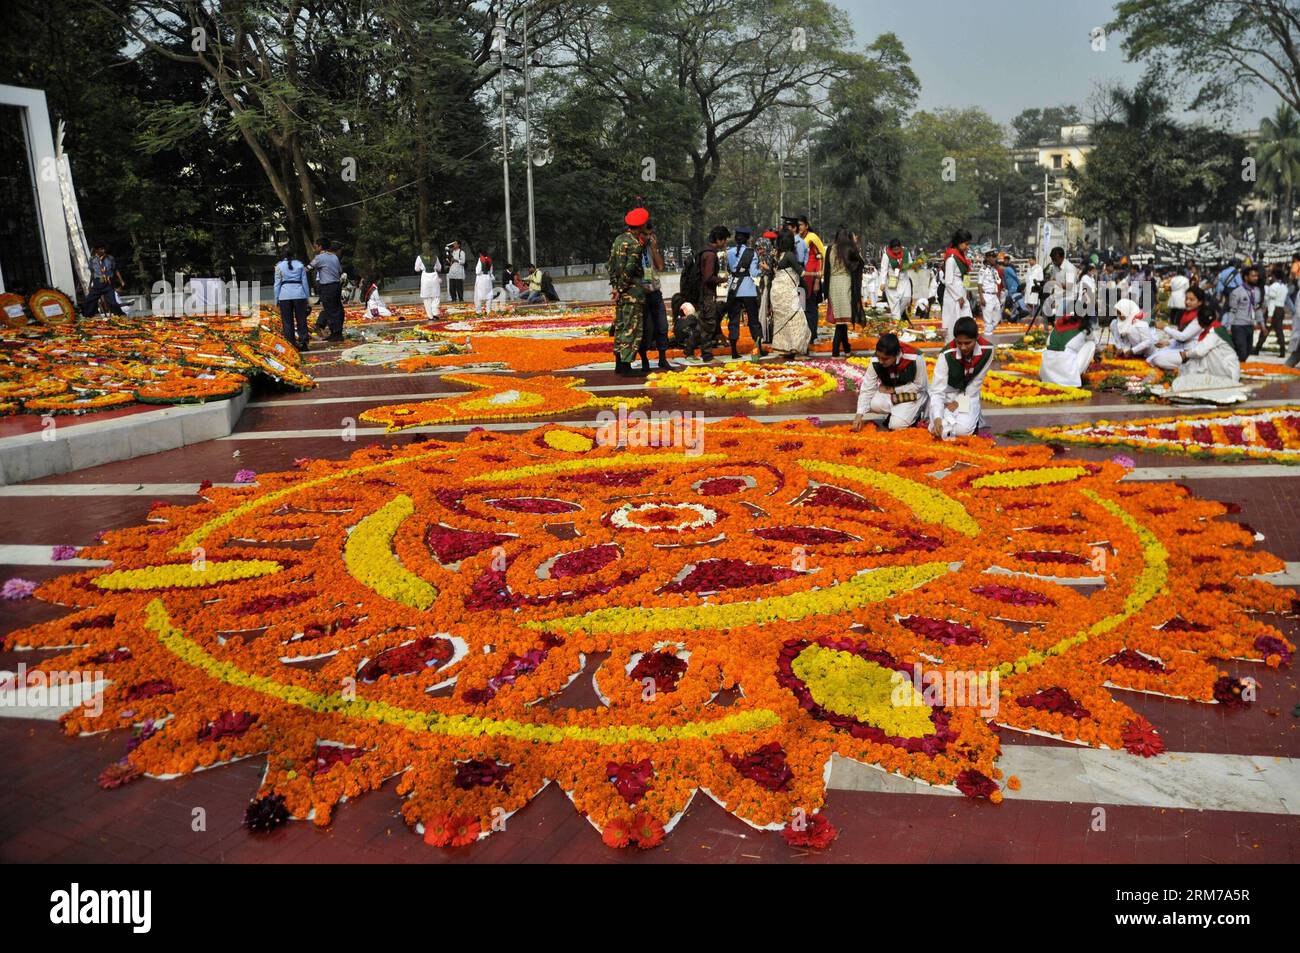 (140221) -- DHAKA, Feb. 21, 2014 (Xinhua) -- Volunteers decorate Language Martyrs Memorial monument with flowers during the International Mother Language Day in Dhaka, Bangladesh, Feb. 21, 2014. People pay tributes every year to the language movement martyrs, who sacrificed their lives for establishing Bangla as a state language of then Pakistan in 1952. United Nations Educational, Scientific and Cultural Organization declared Feb. 21 the International Mother Language Day on Nov. 17, 1999 to honor the supreme sacrifice of language martyrs. (Xinhua) BANGLADESH-DHAKA-MOTHER LANGUAGE DAY-CELEBRAT Stock Photo